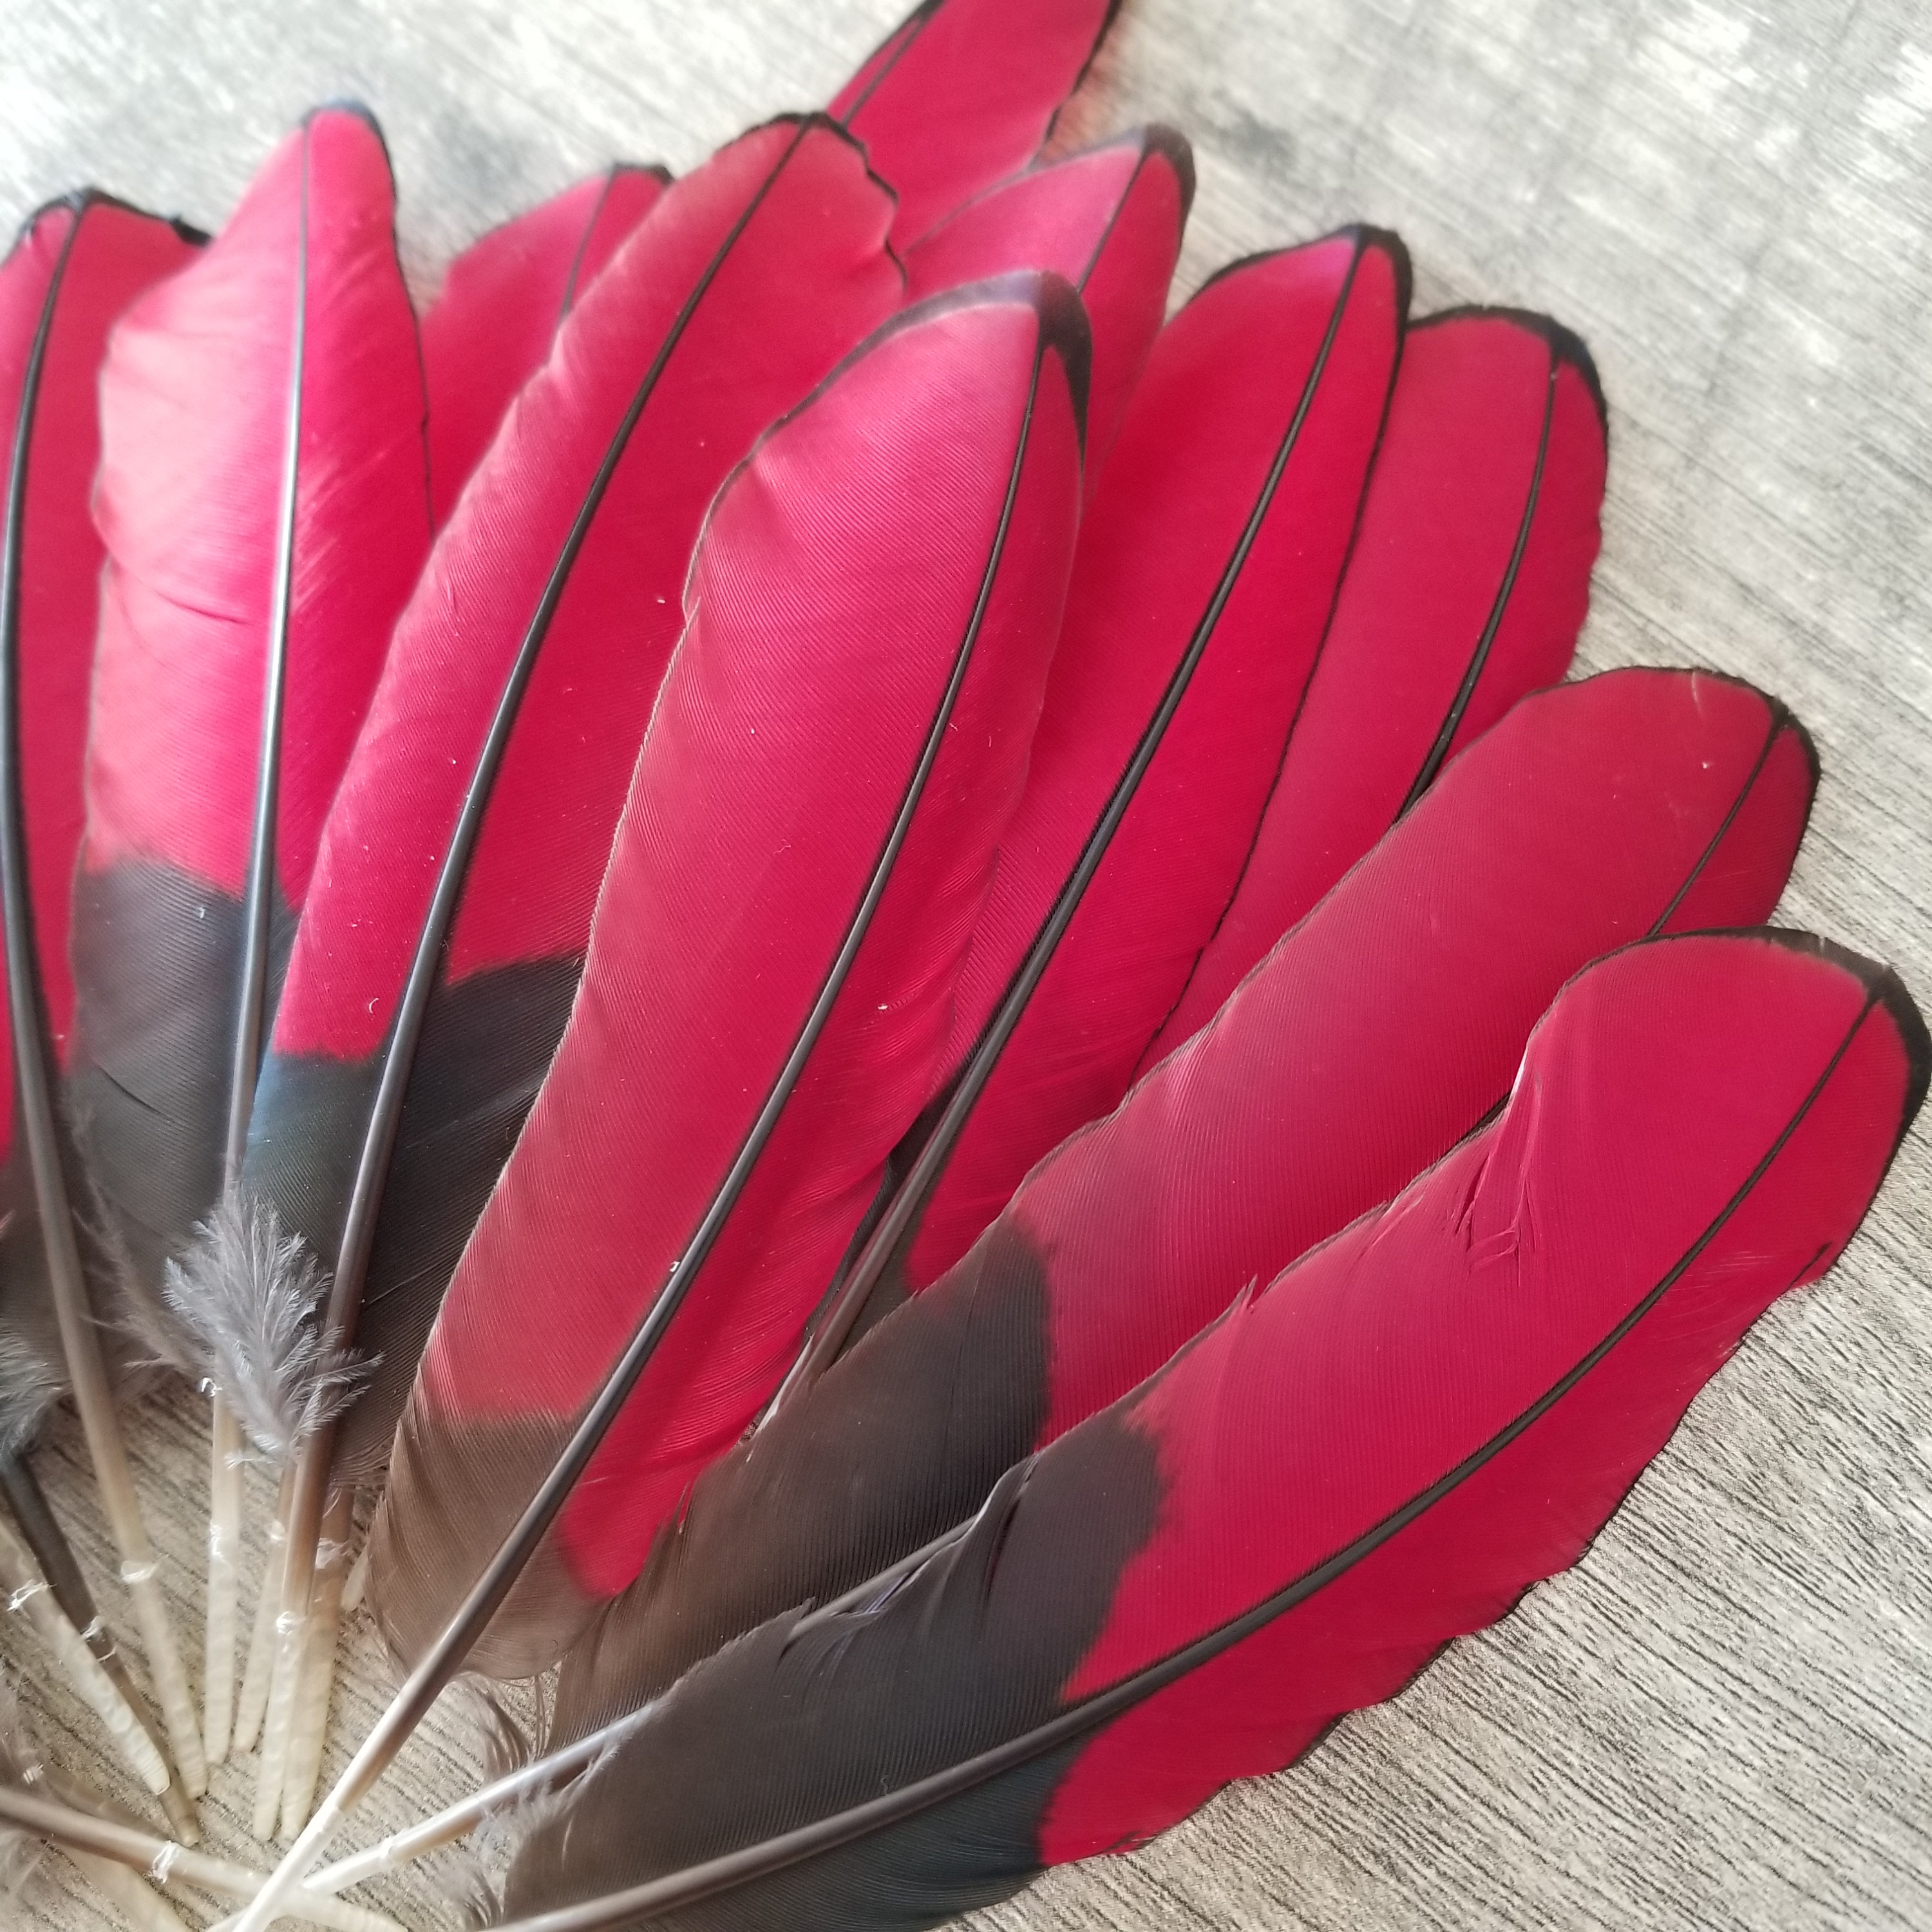 Red Feathers, 2 Pieces, 6-7 Inches 